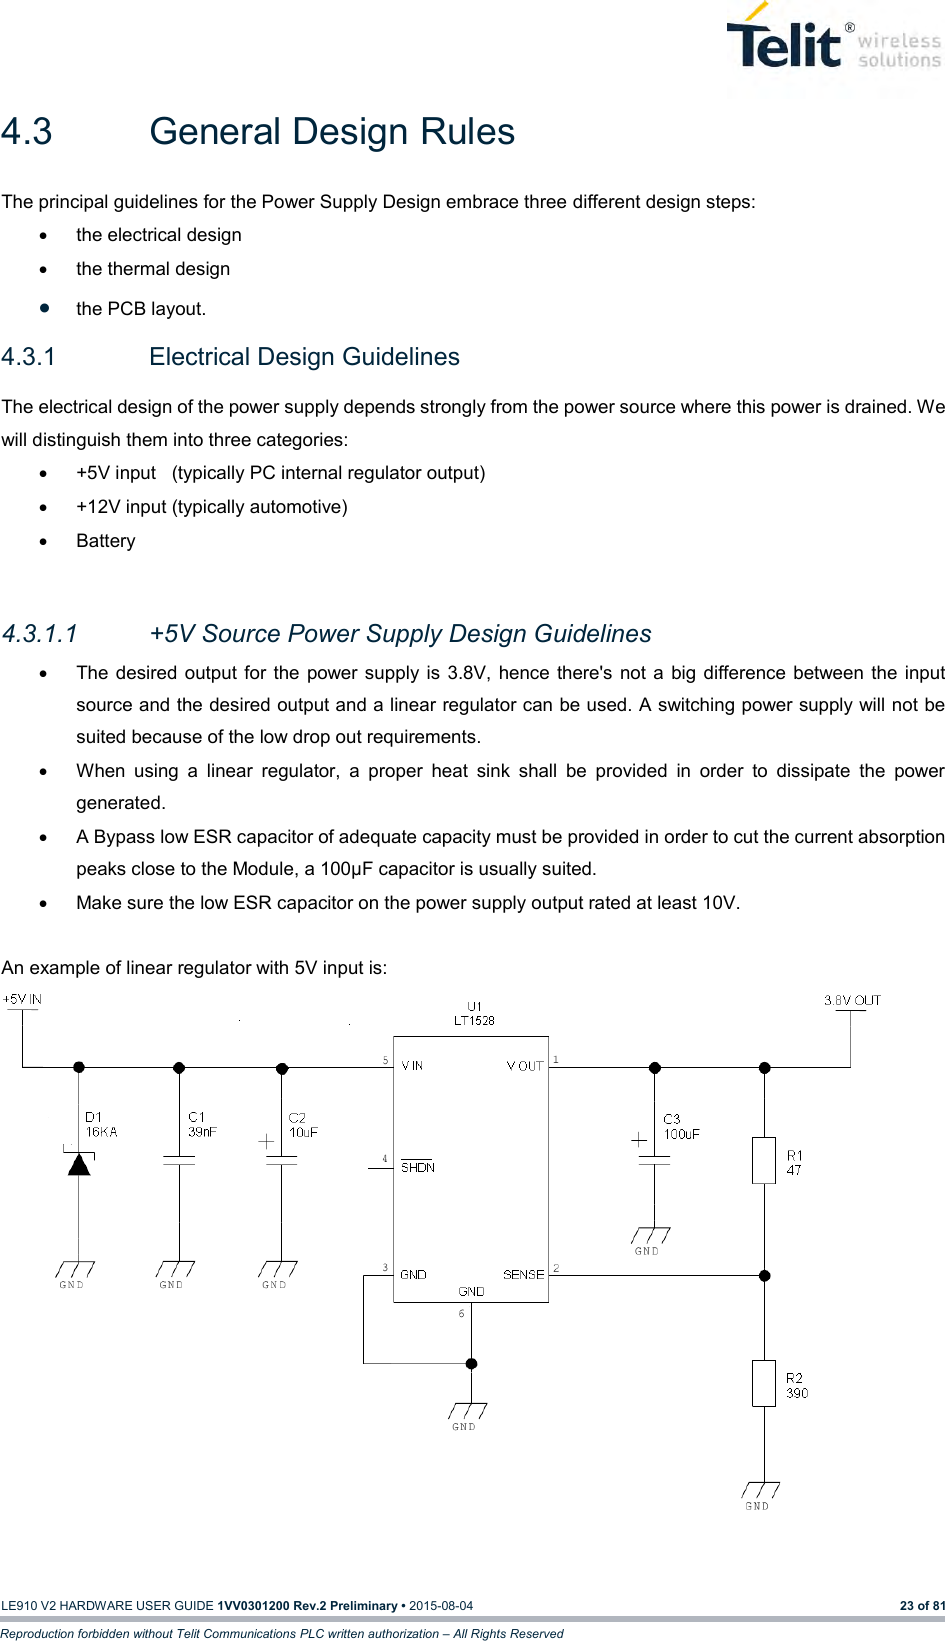   LE910 V2 HARDWARE USER GUIDE 1VV0301200 Rev.2 Preliminary • 2015-08-04 23 of 81 Reproduction forbidden without Telit Communications PLC written authorization – All Rights Reserved 4.3  General Design Rules The principal guidelines for the Power Supply Design embrace three different design steps:   the electrical design   the thermal design  the PCB layout. 4.3.1  Electrical Design Guidelines The electrical design of the power supply depends strongly from the power source where this power is drained. We will distinguish them into three categories:   +5V input   (typically PC internal regulator output)   +12V input (typically automotive)   Battery  4.3.1.1  +5V Source Power Supply Design Guidelines   The desired output for the power  supply  is  3.8V,  hence there&apos;s  not a big difference between the input source and the desired output and a linear regulator can be used. A switching power supply will not be suited because of the low drop out requirements.   When  using  a  linear  regulator,  a  proper  heat  sink  shall  be  provided  in  order  to  dissipate  the  power generated.   A Bypass low ESR capacitor of adequate capacity must be provided in order to cut the current absorption peaks close to the Module, a 100μF capacitor is usually suited.   Make sure the low ESR capacitor on the power supply output rated at least 10V.  An example of linear regulator with 5V input is:    